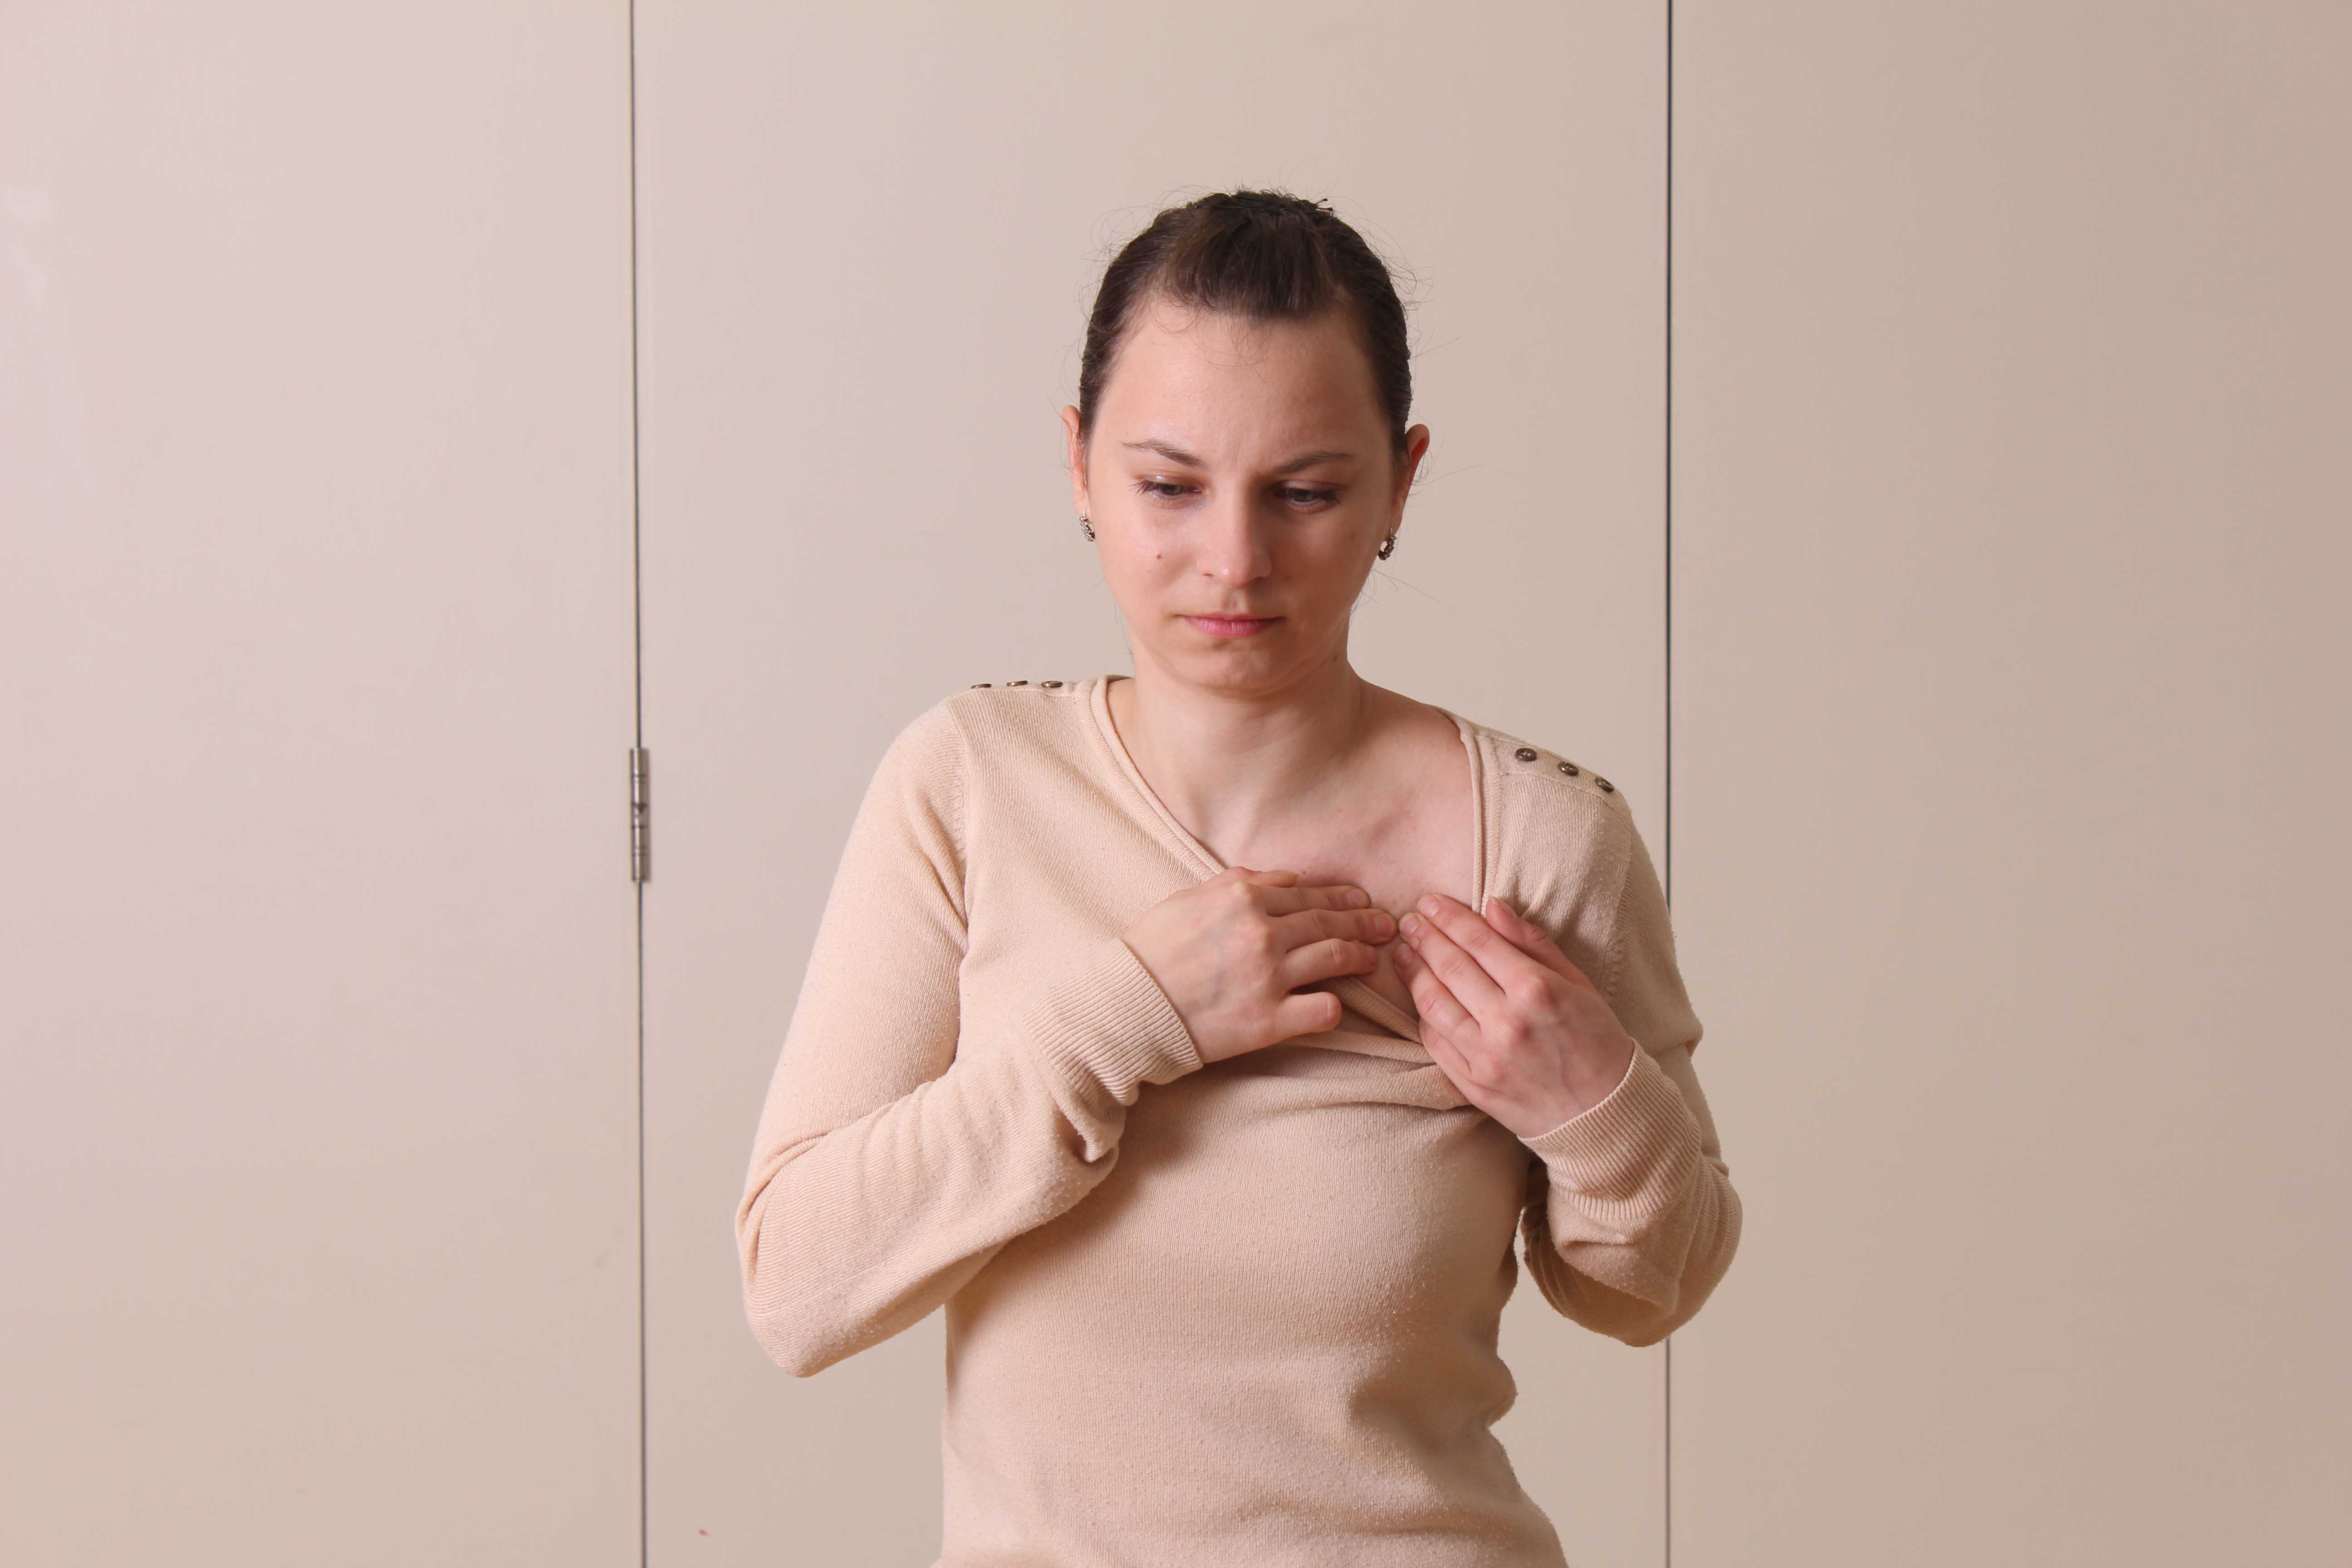 A patient suffering with pain and discomfort in her chest and thoracic area.